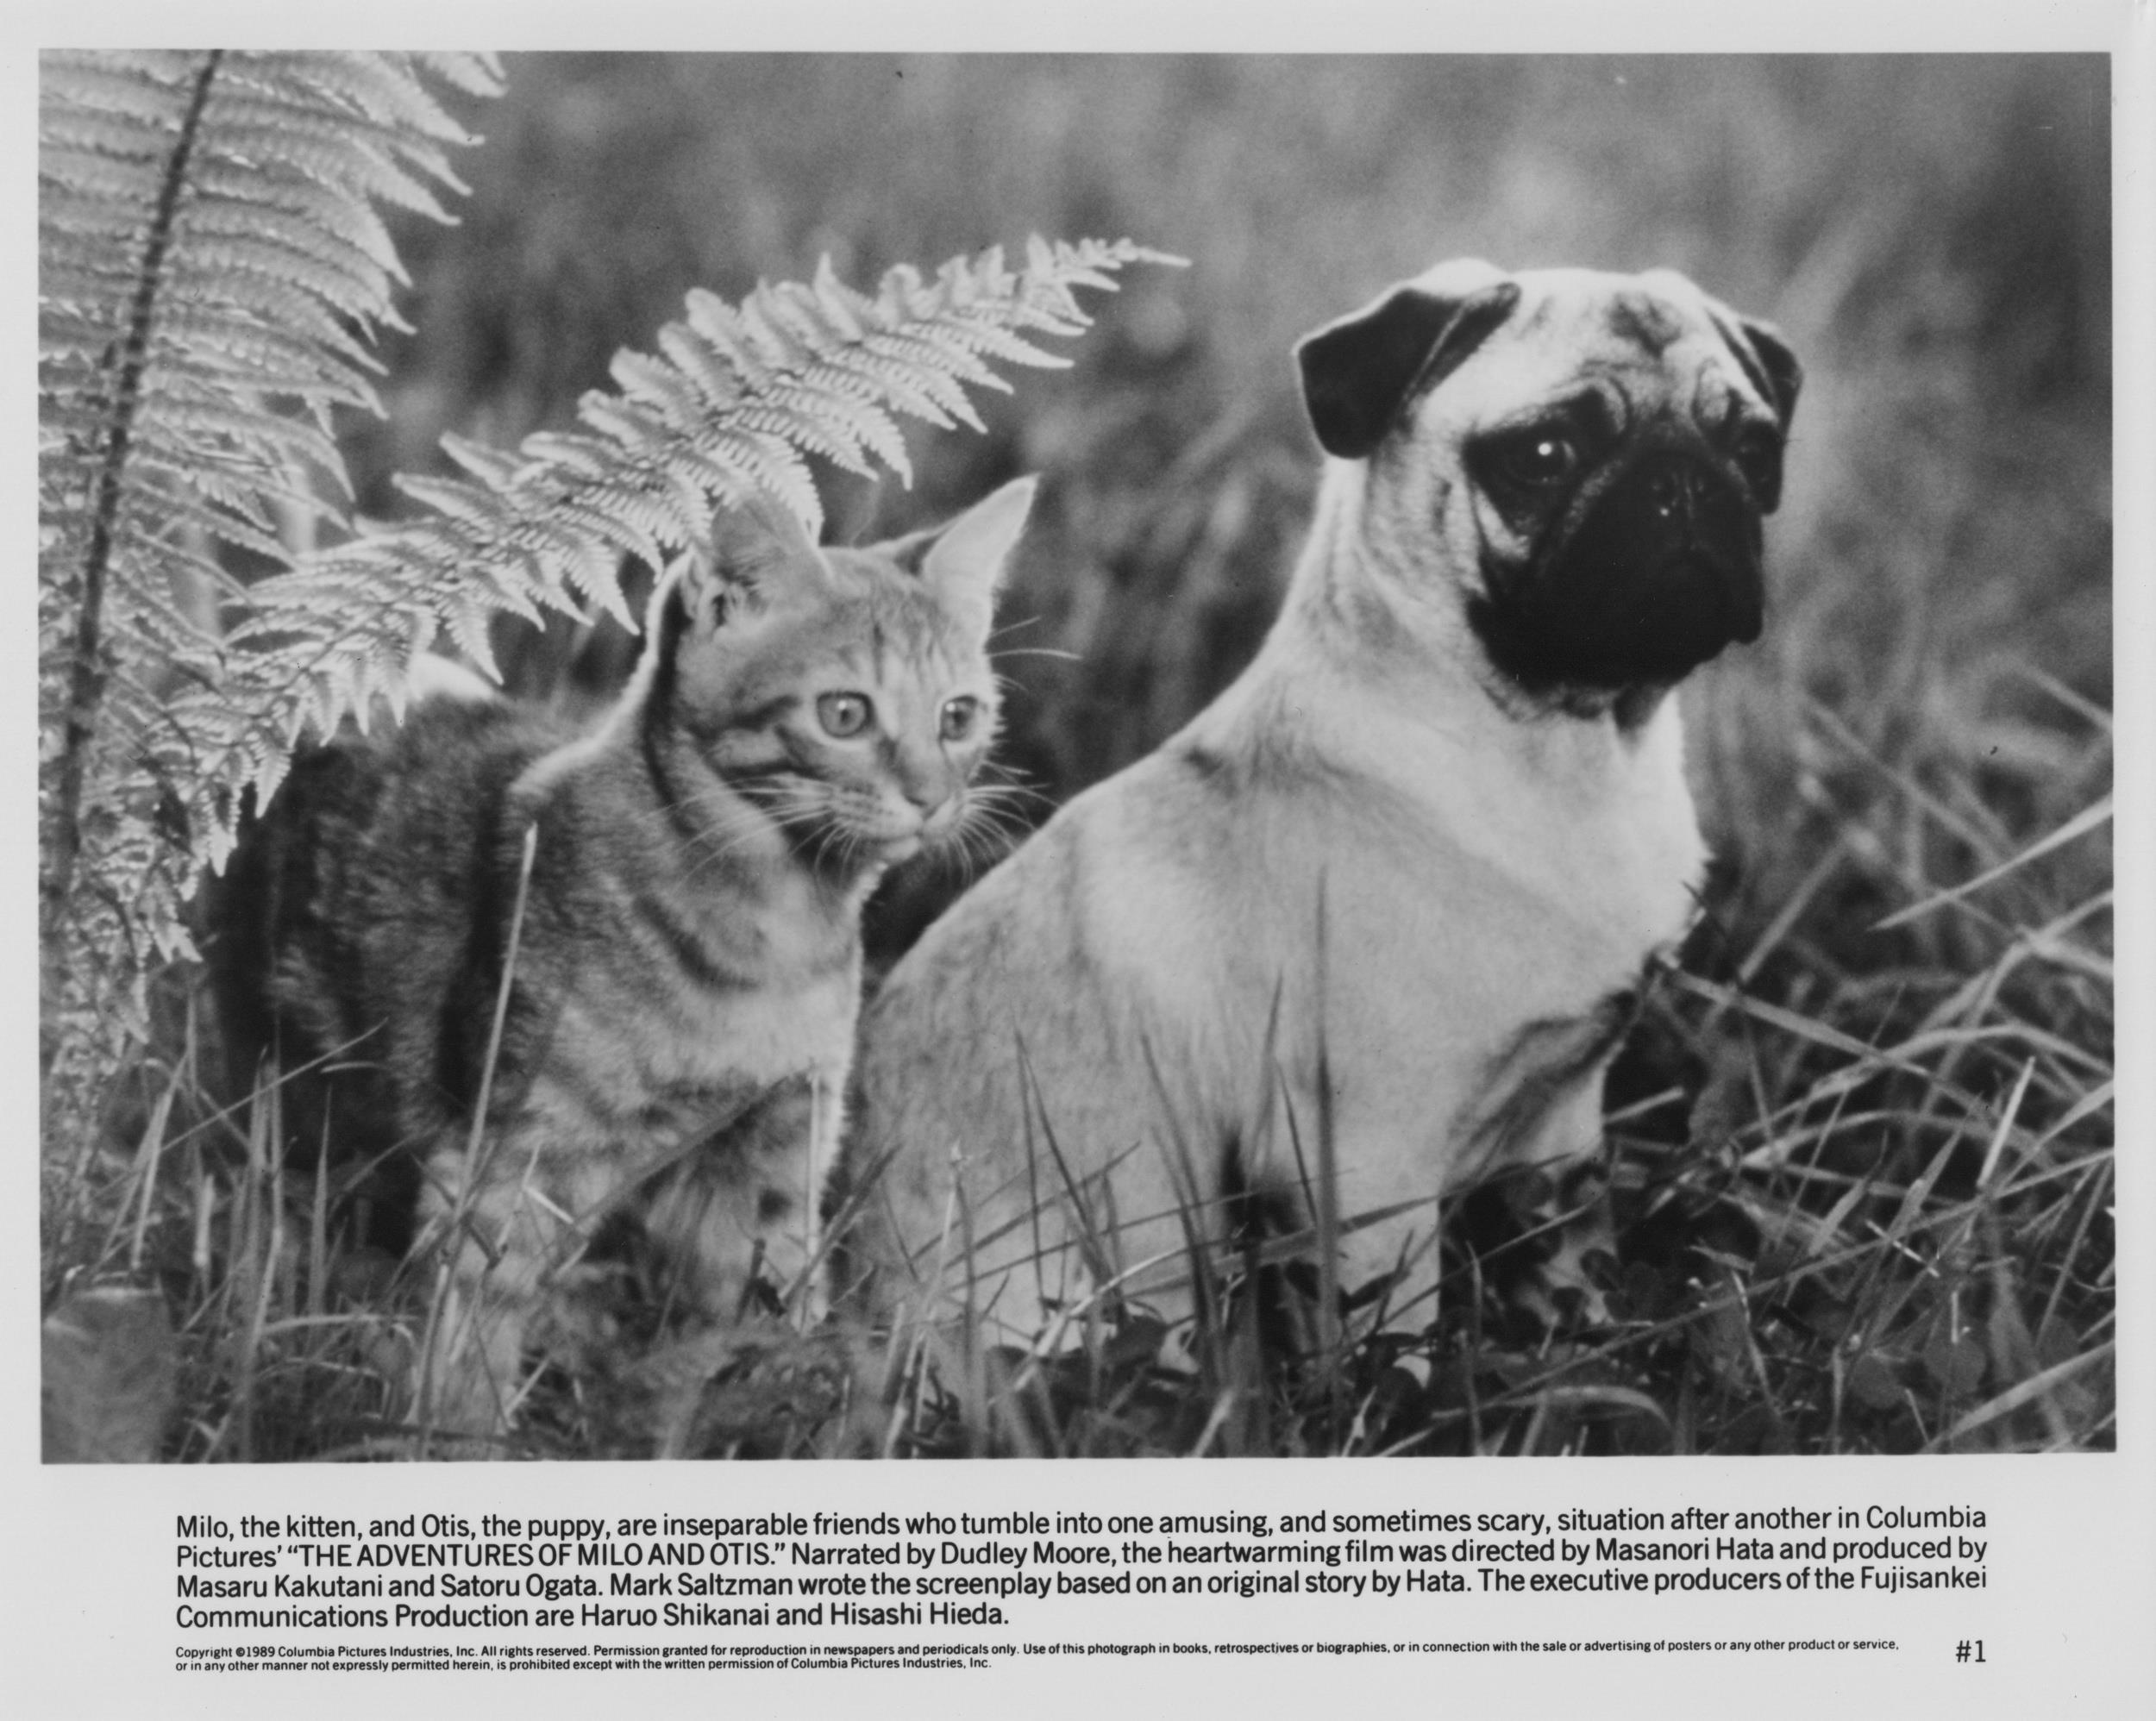 <p>Originally a Japanese movie, “The Adventures of Milo and Otis” tells the tale of a tabby cat and a pug. Apparently it was shot over four years, presumably just to get enough footage of the animals doing interesting things. It was adapted for American audiences by cutting out 15 minutes and adding narration by Dudley Moore. This worked, as it was a hit.</p><p><a href='https://www.msn.com/en-us/community/channel/vid-cj9pqbr0vn9in2b6ddcd8sfgpfq6x6utp44fssrv6mc2gtybw0us'>Follow us on MSN to see more of our exclusive entertainment content.</a></p>